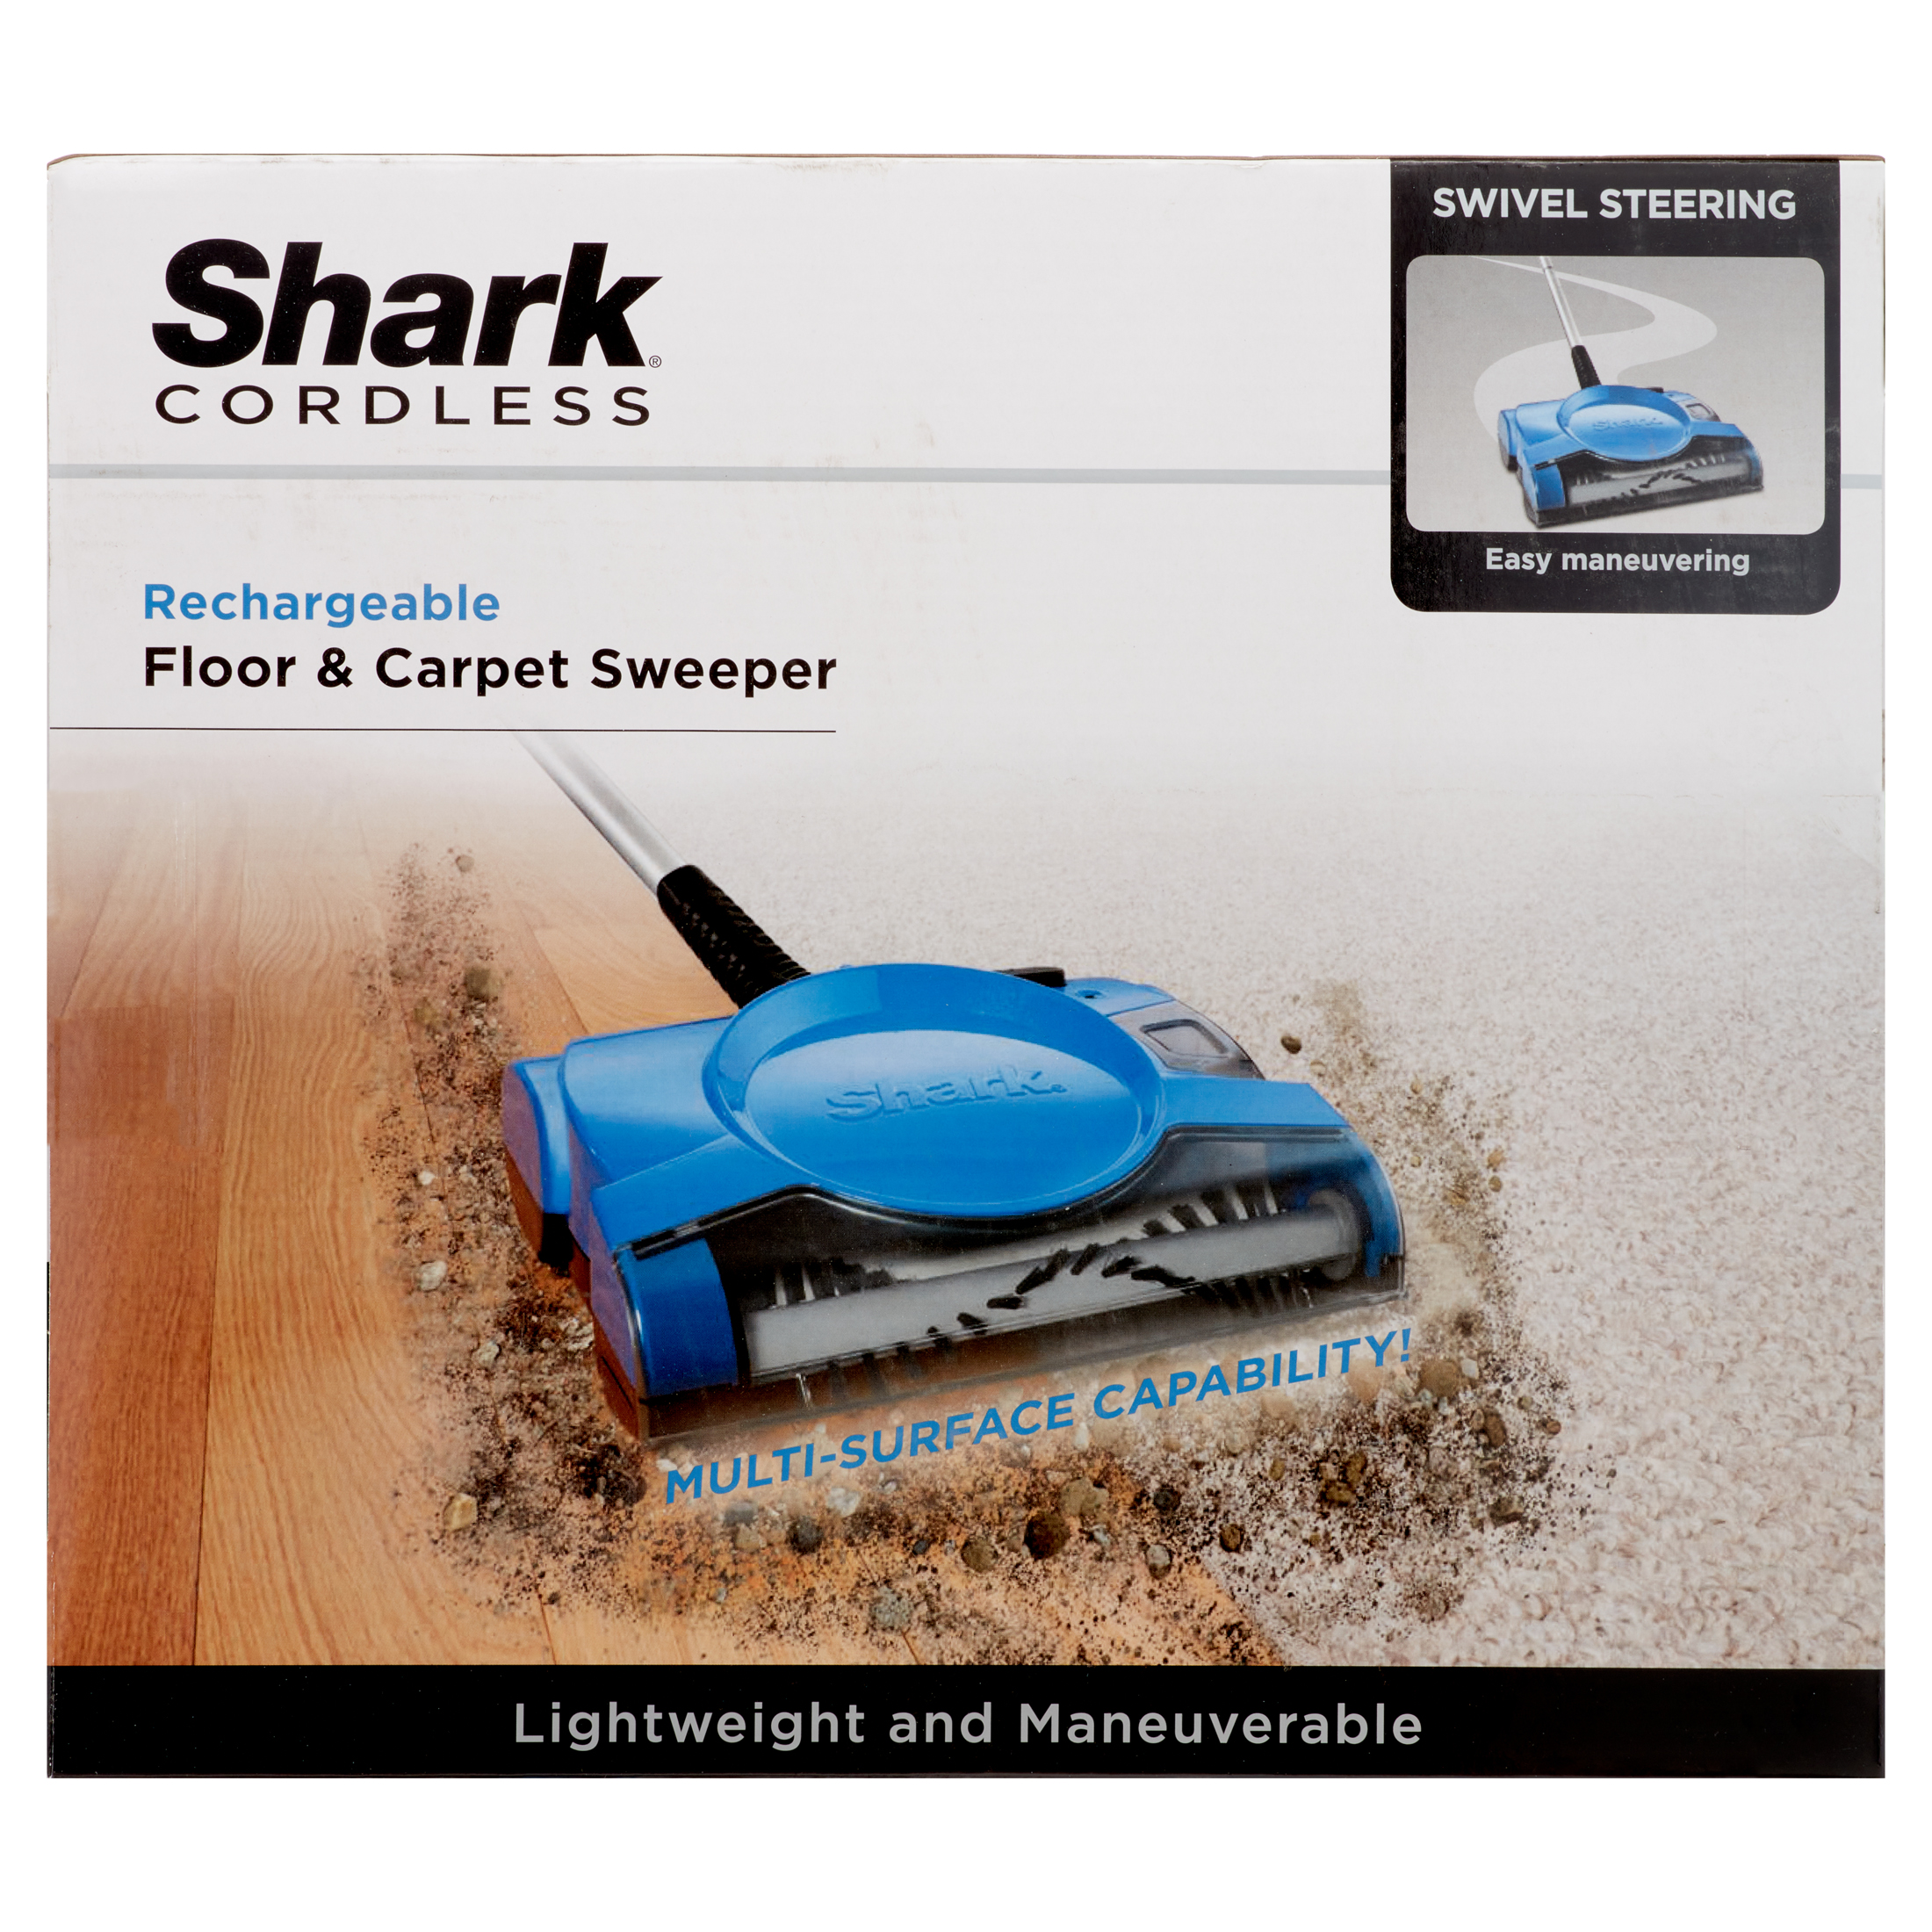 Shark V2700Z Lightweight 10 Inch Cordless Rechargeable Floor and Carpet Sweeper - image 4 of 10